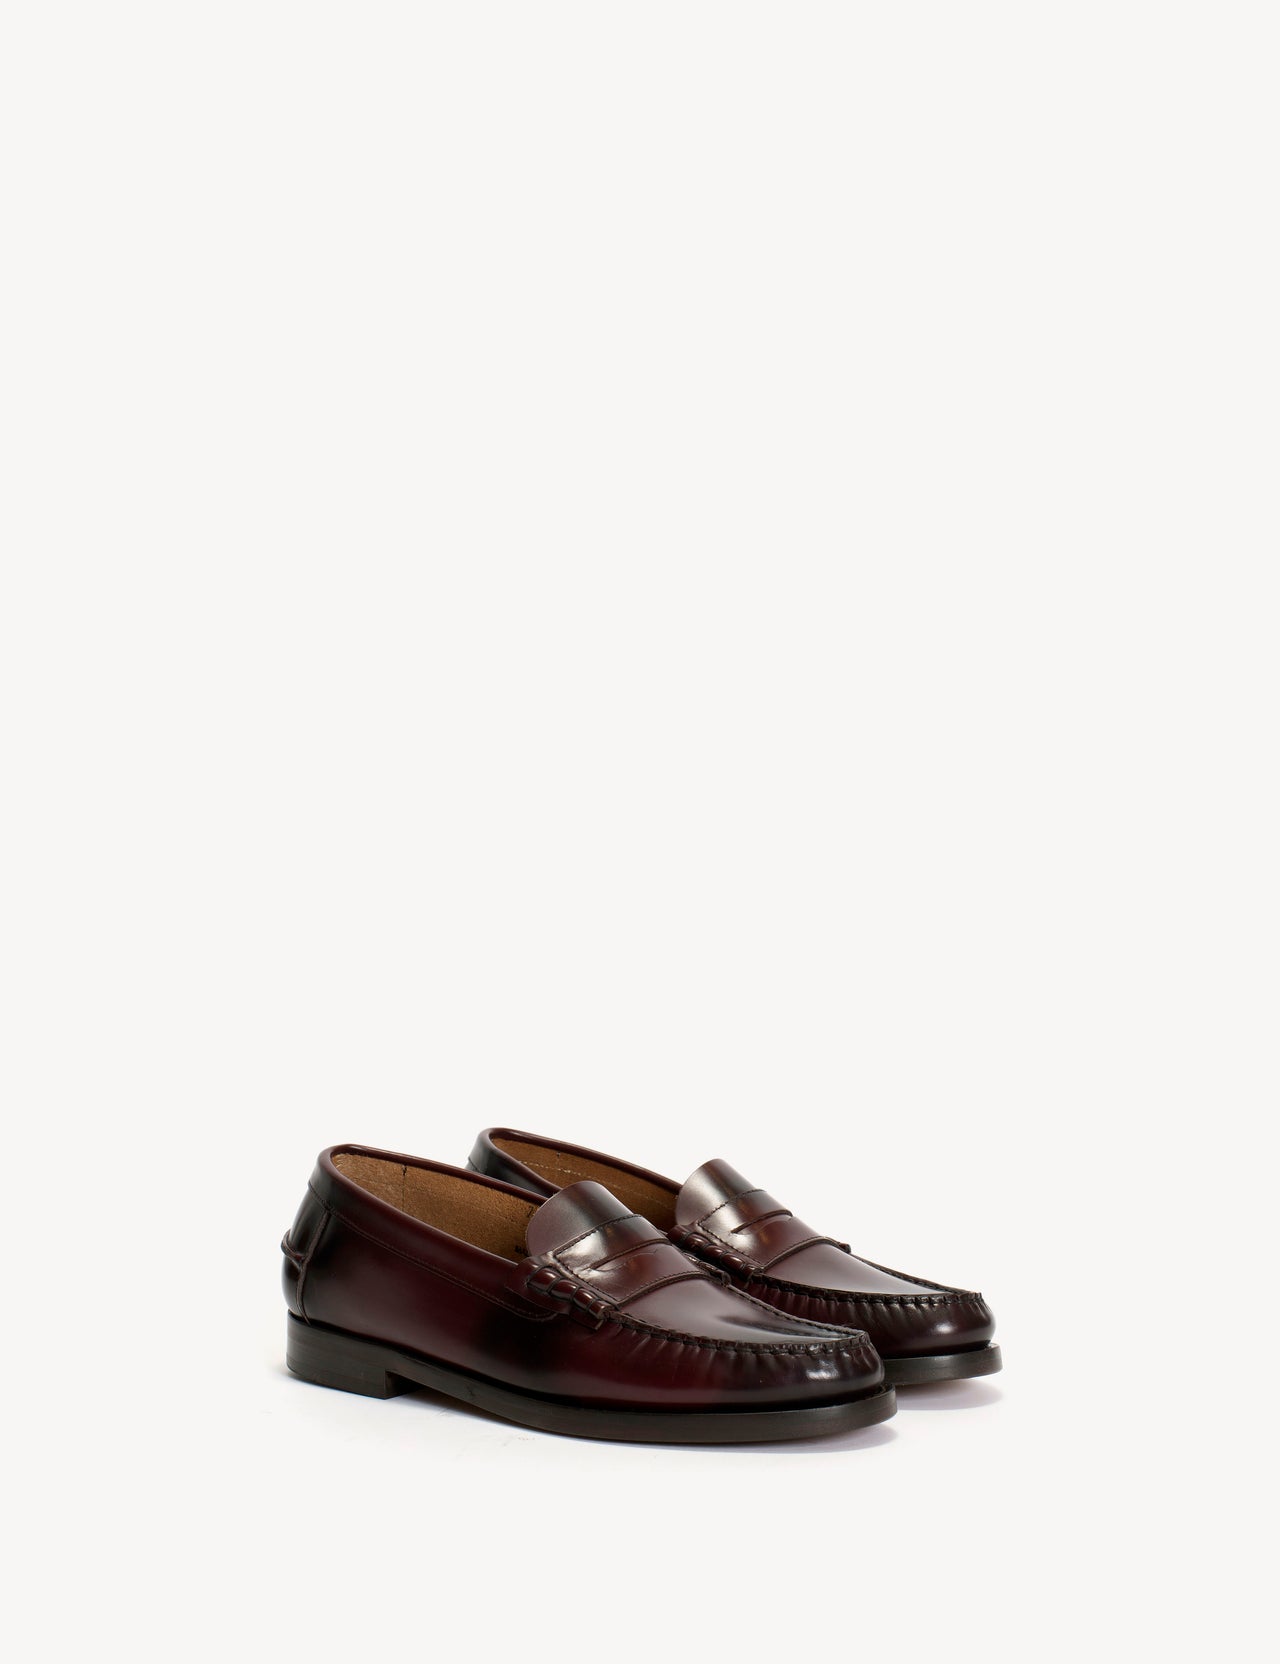 Moccasin Penny Loafer In Bordeaux Polido Leather